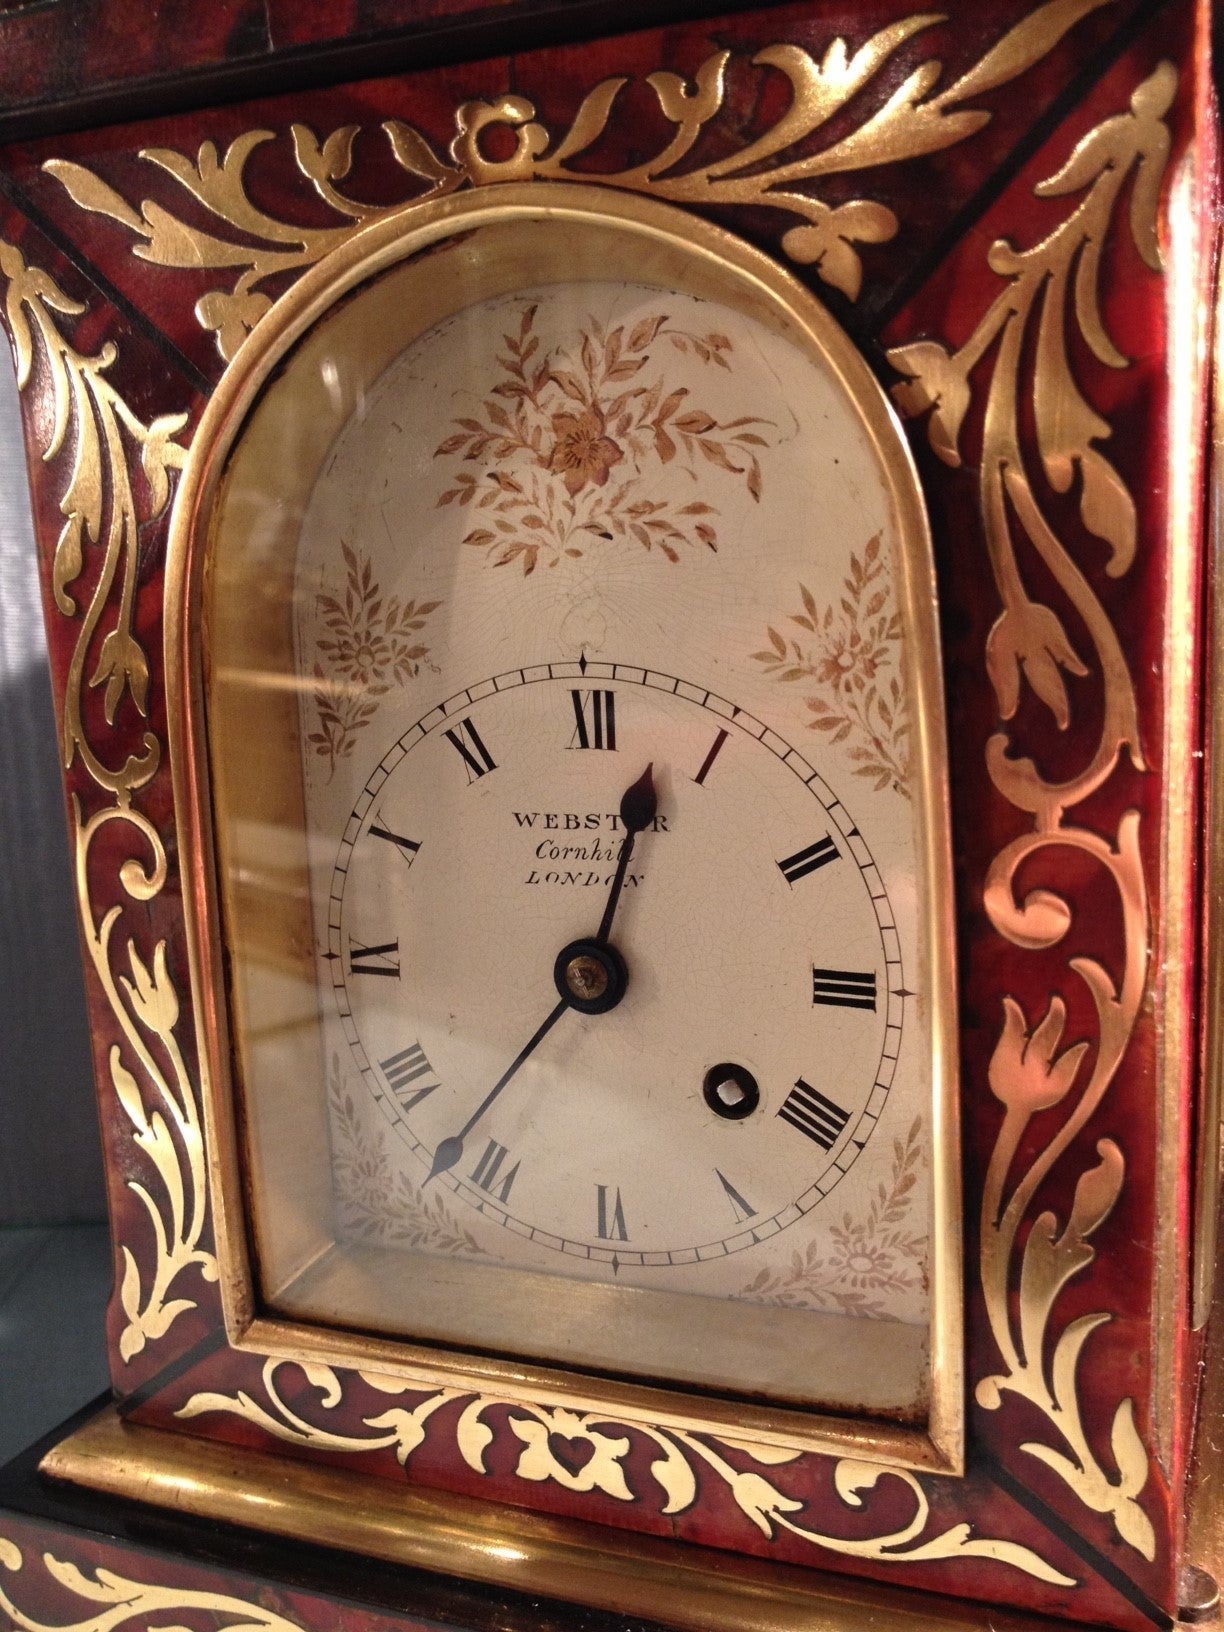 A charming Regency period red tortoiseshell and brass inlaid mantel timepiece, by this celebrated family of London clockmakers. 

The classically styled glazed case is veneered with red tortoiseshell and inlaid with flowing stem and flower